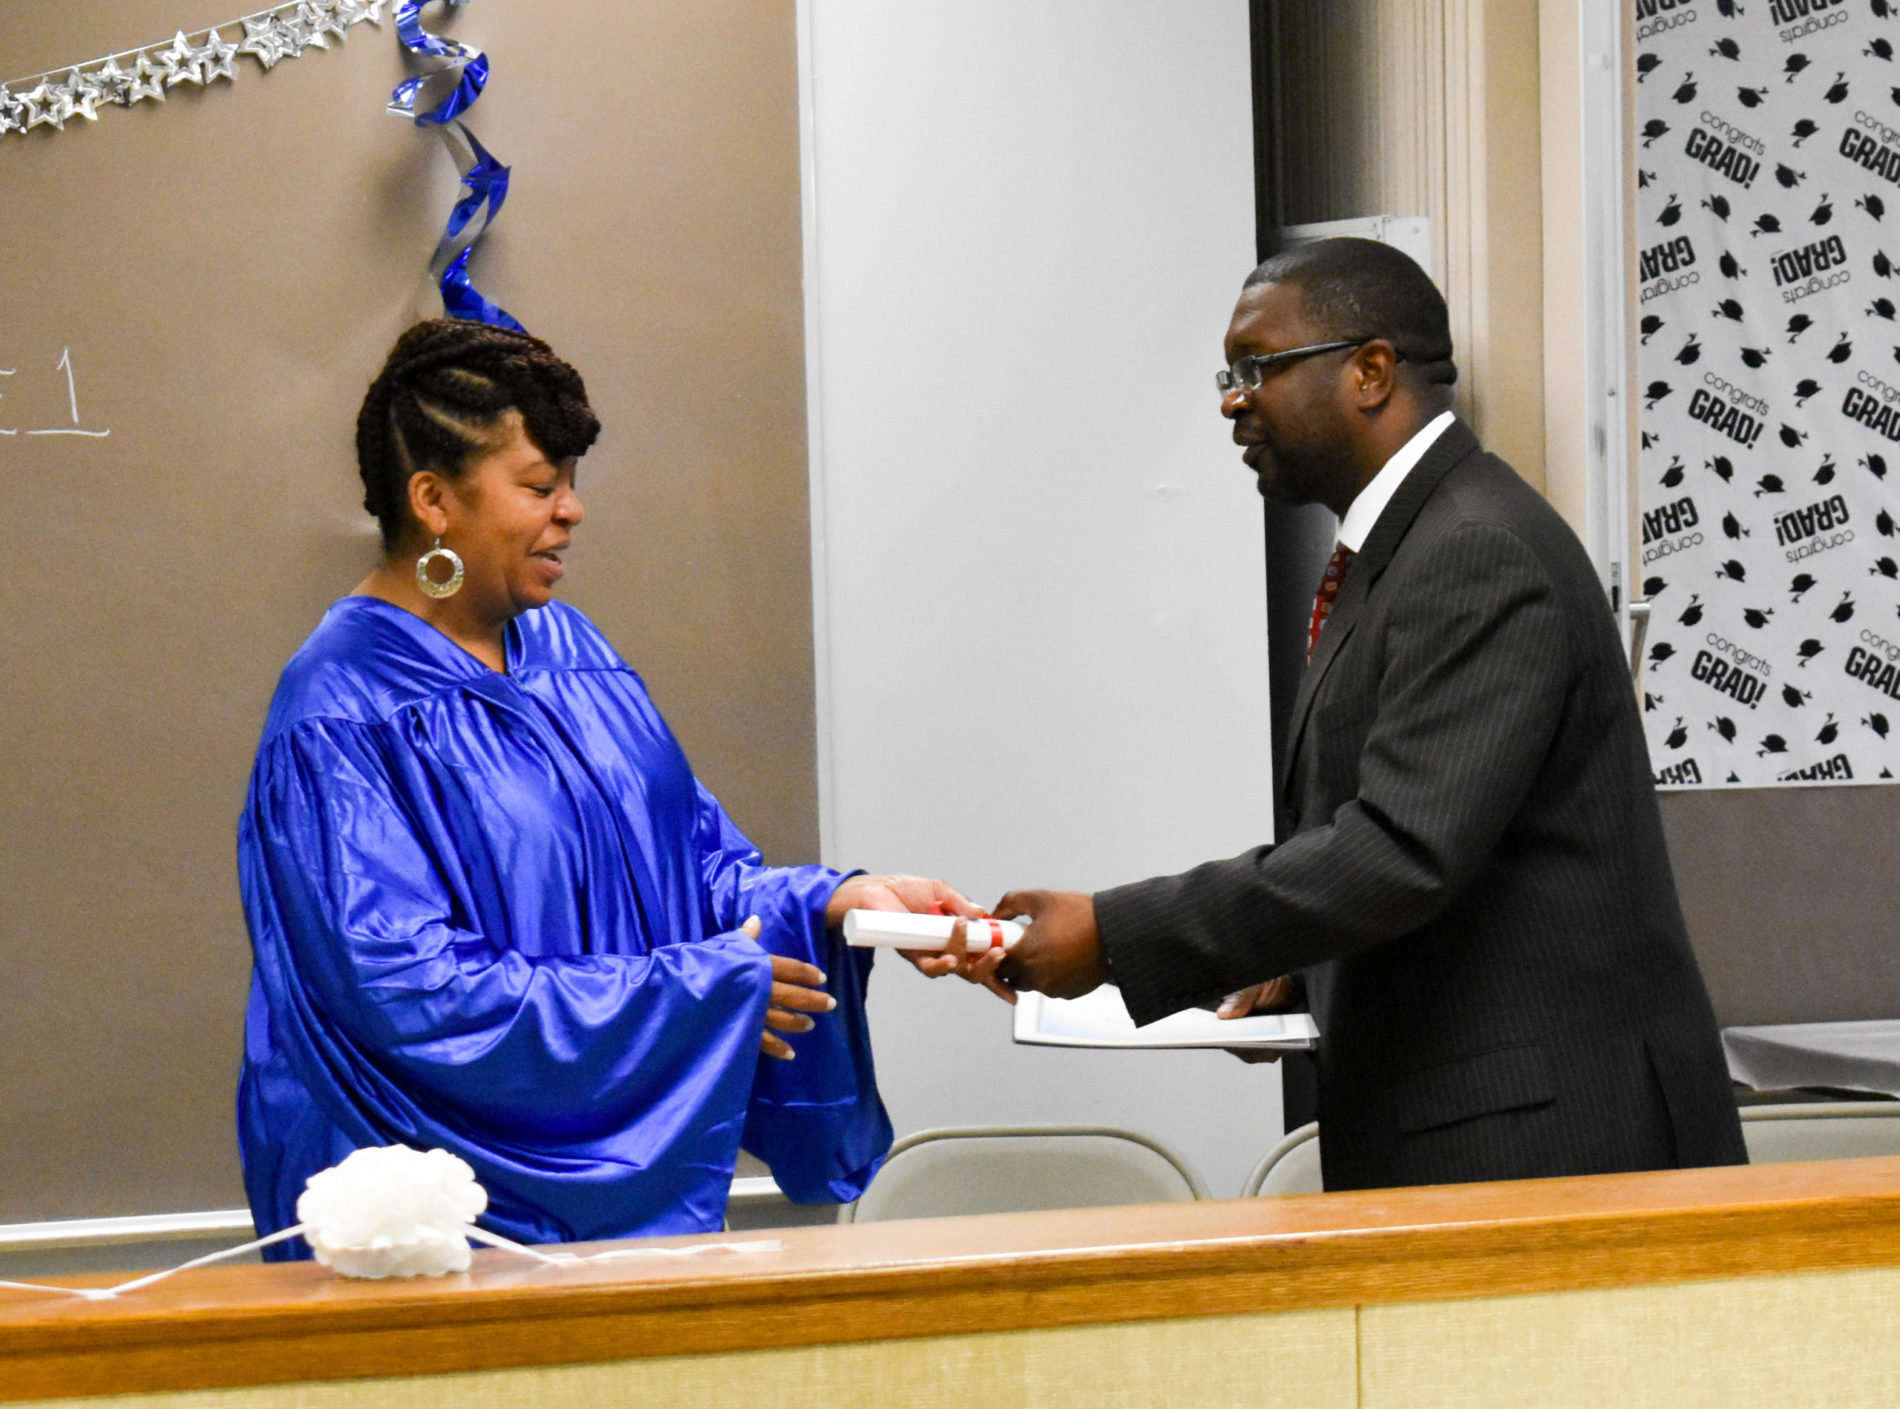 Woman receives her certificate for a job training program